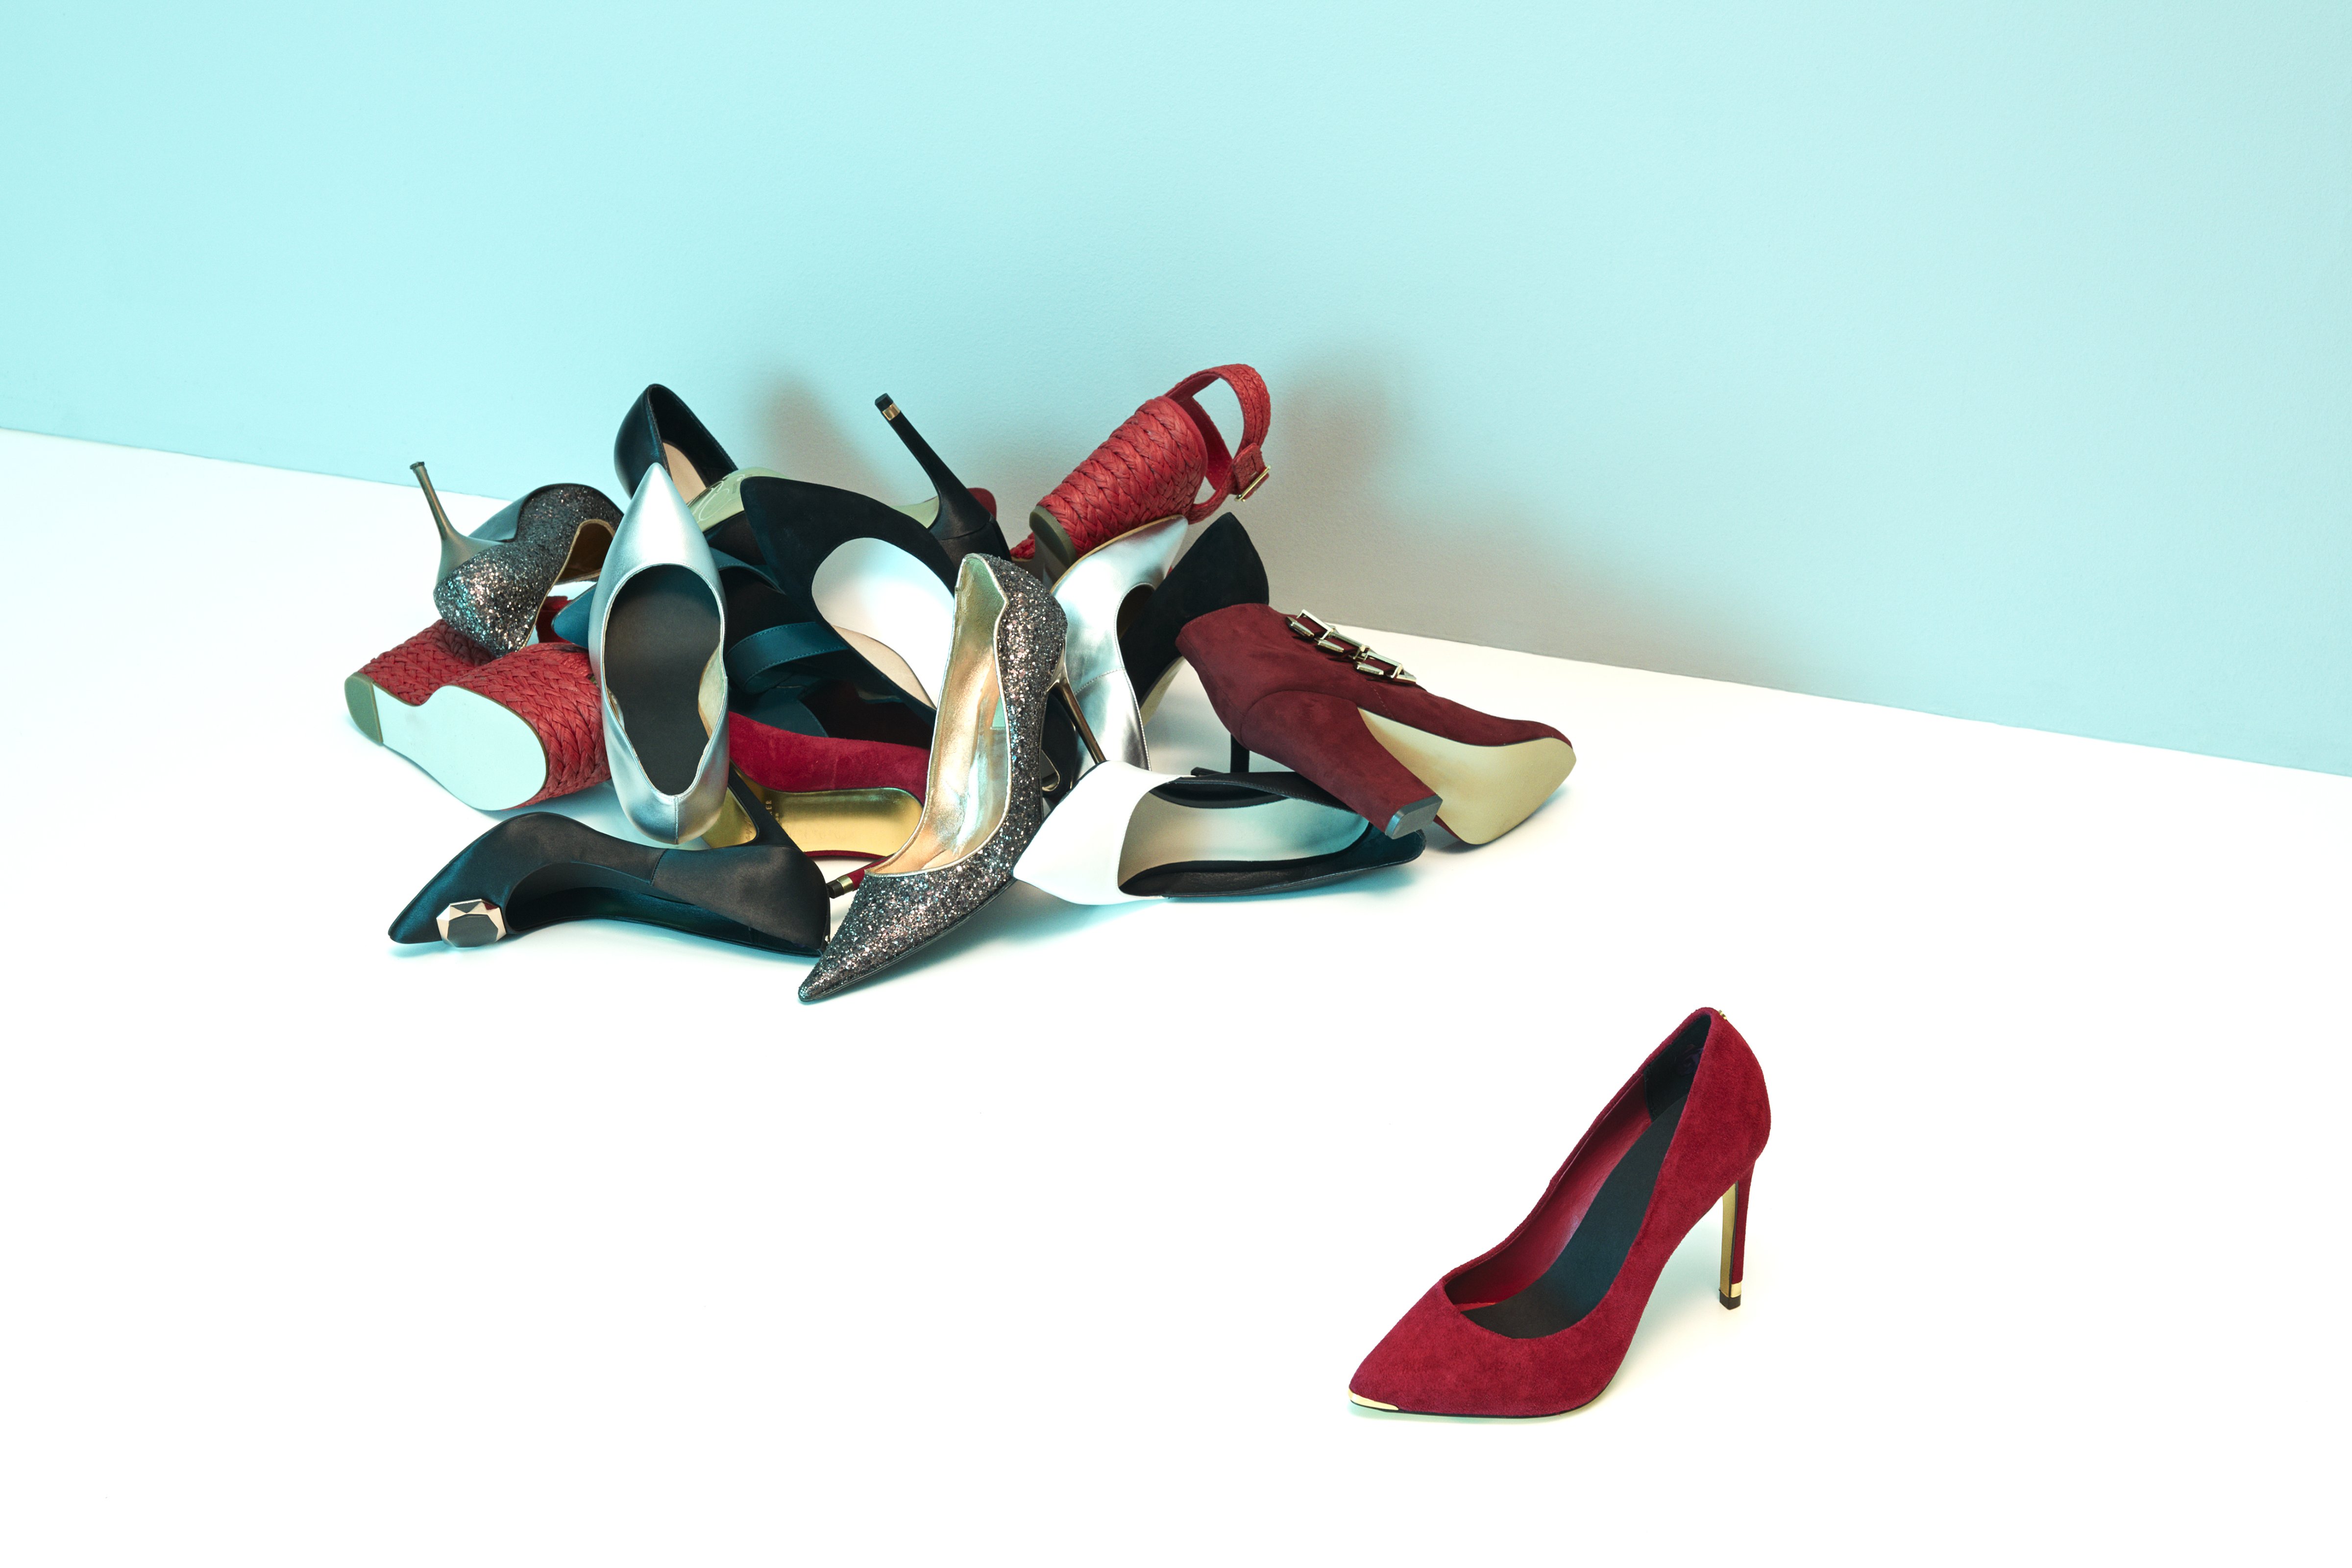 Assorted ladies high heeled shoes (Getty Images)